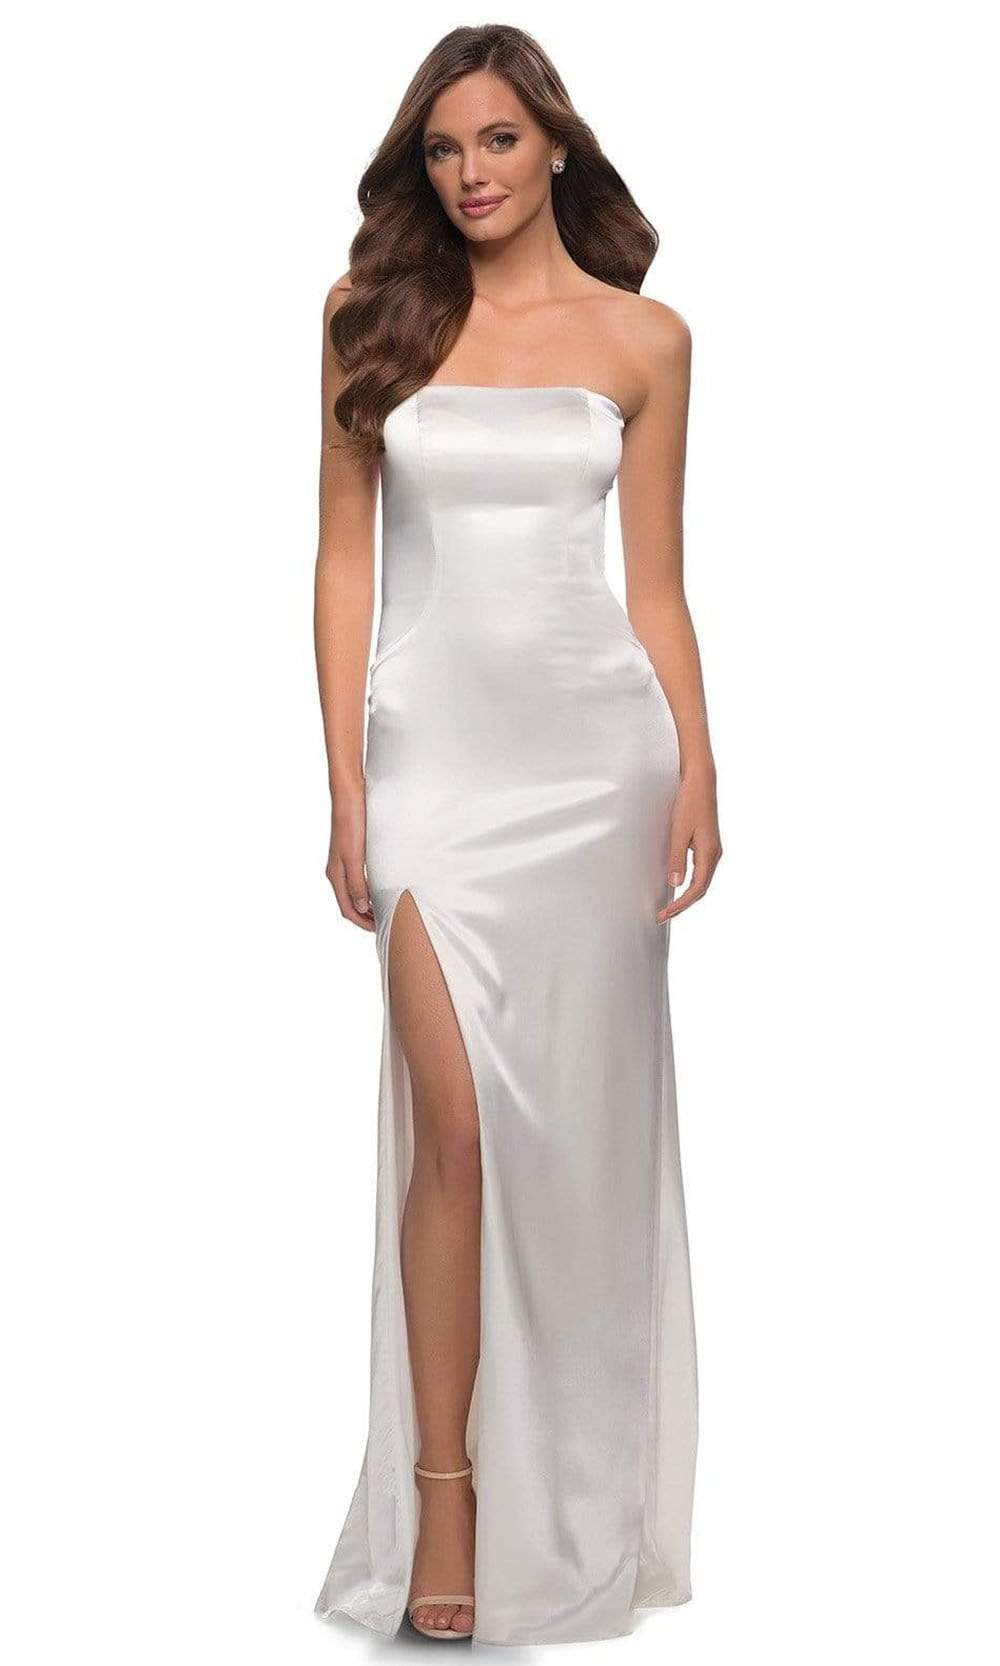 La Femme - 29807 Strapless Fitted Stretch Satin Long Dress Prom Dresses 00 / White